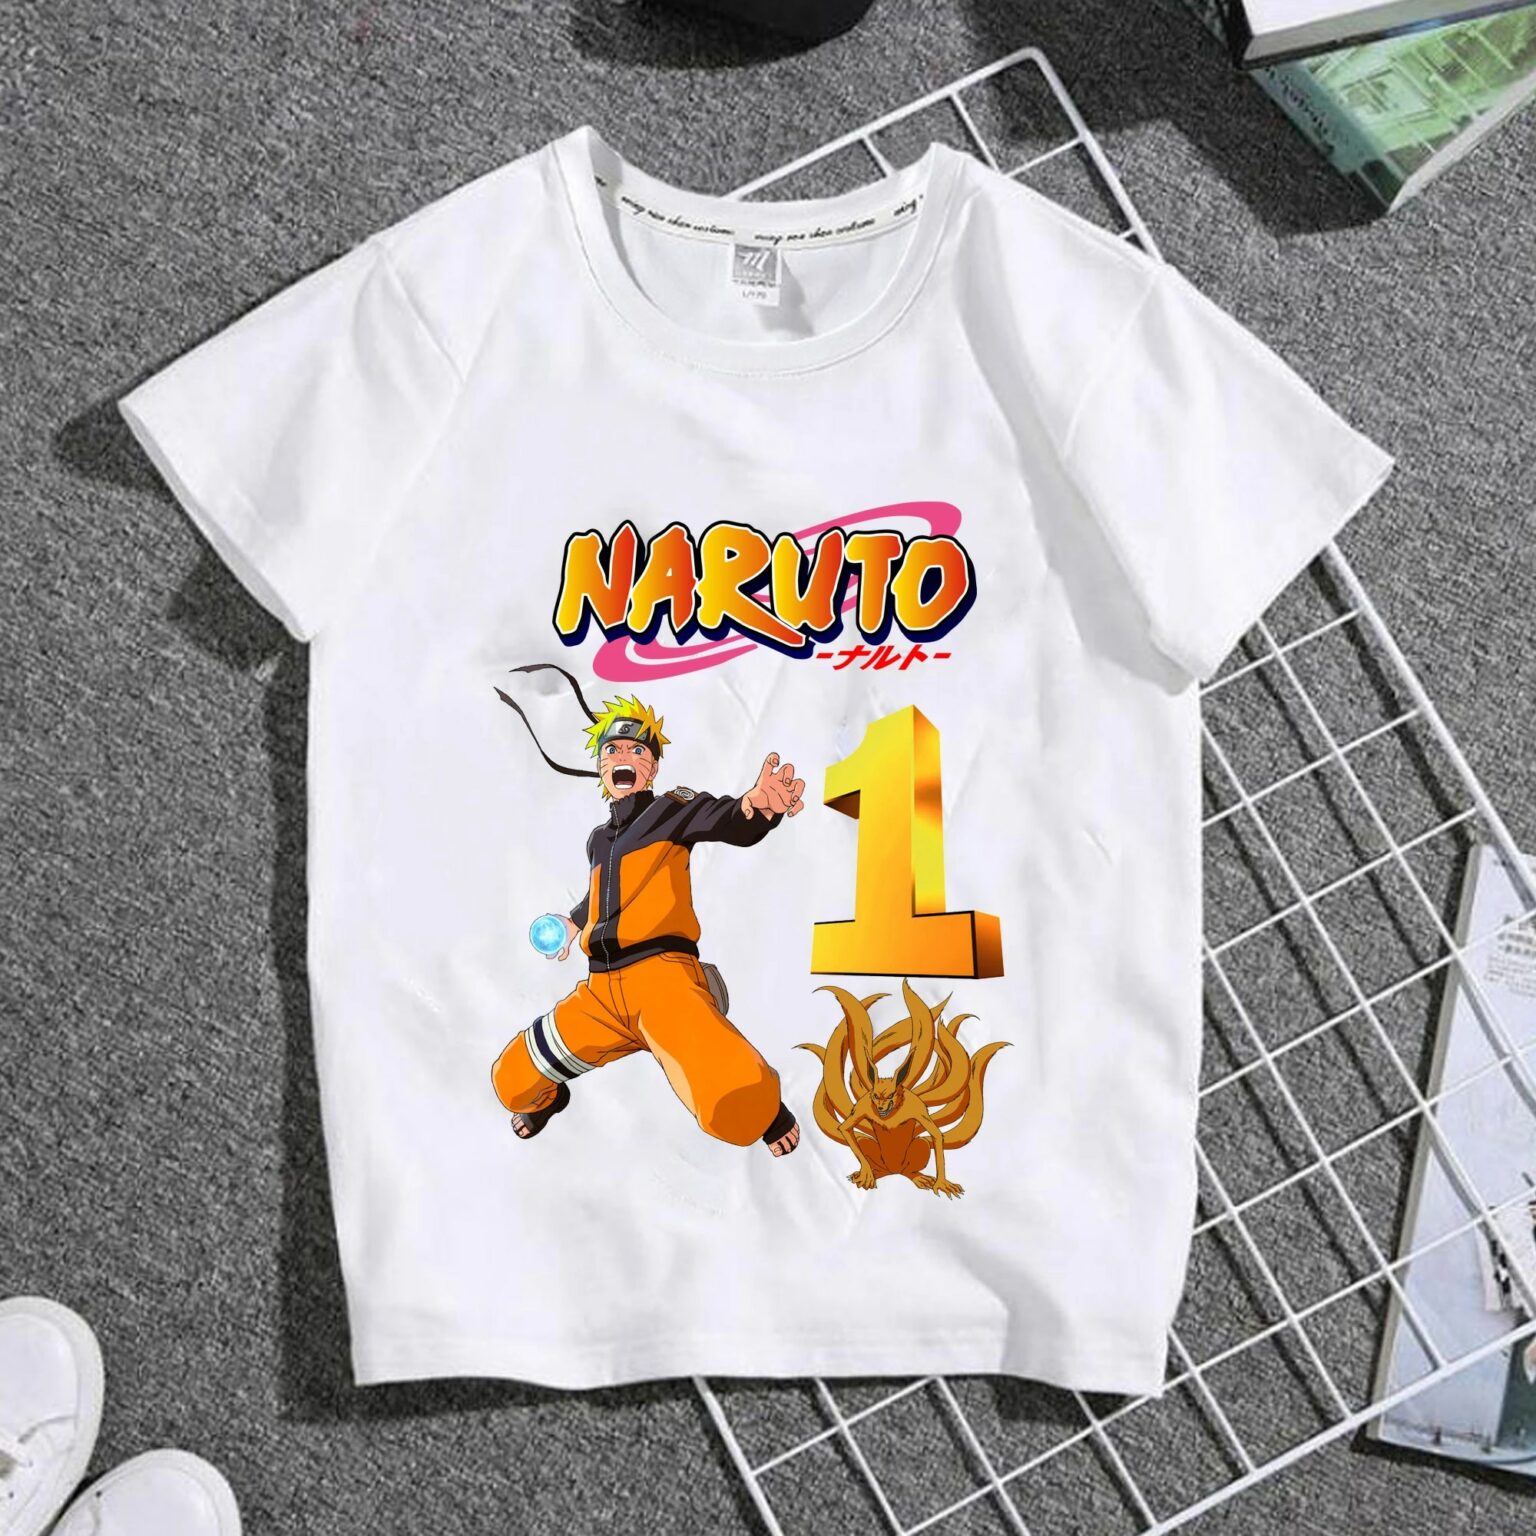 Personalized Name Age Naruto Birthday Shirt Cool